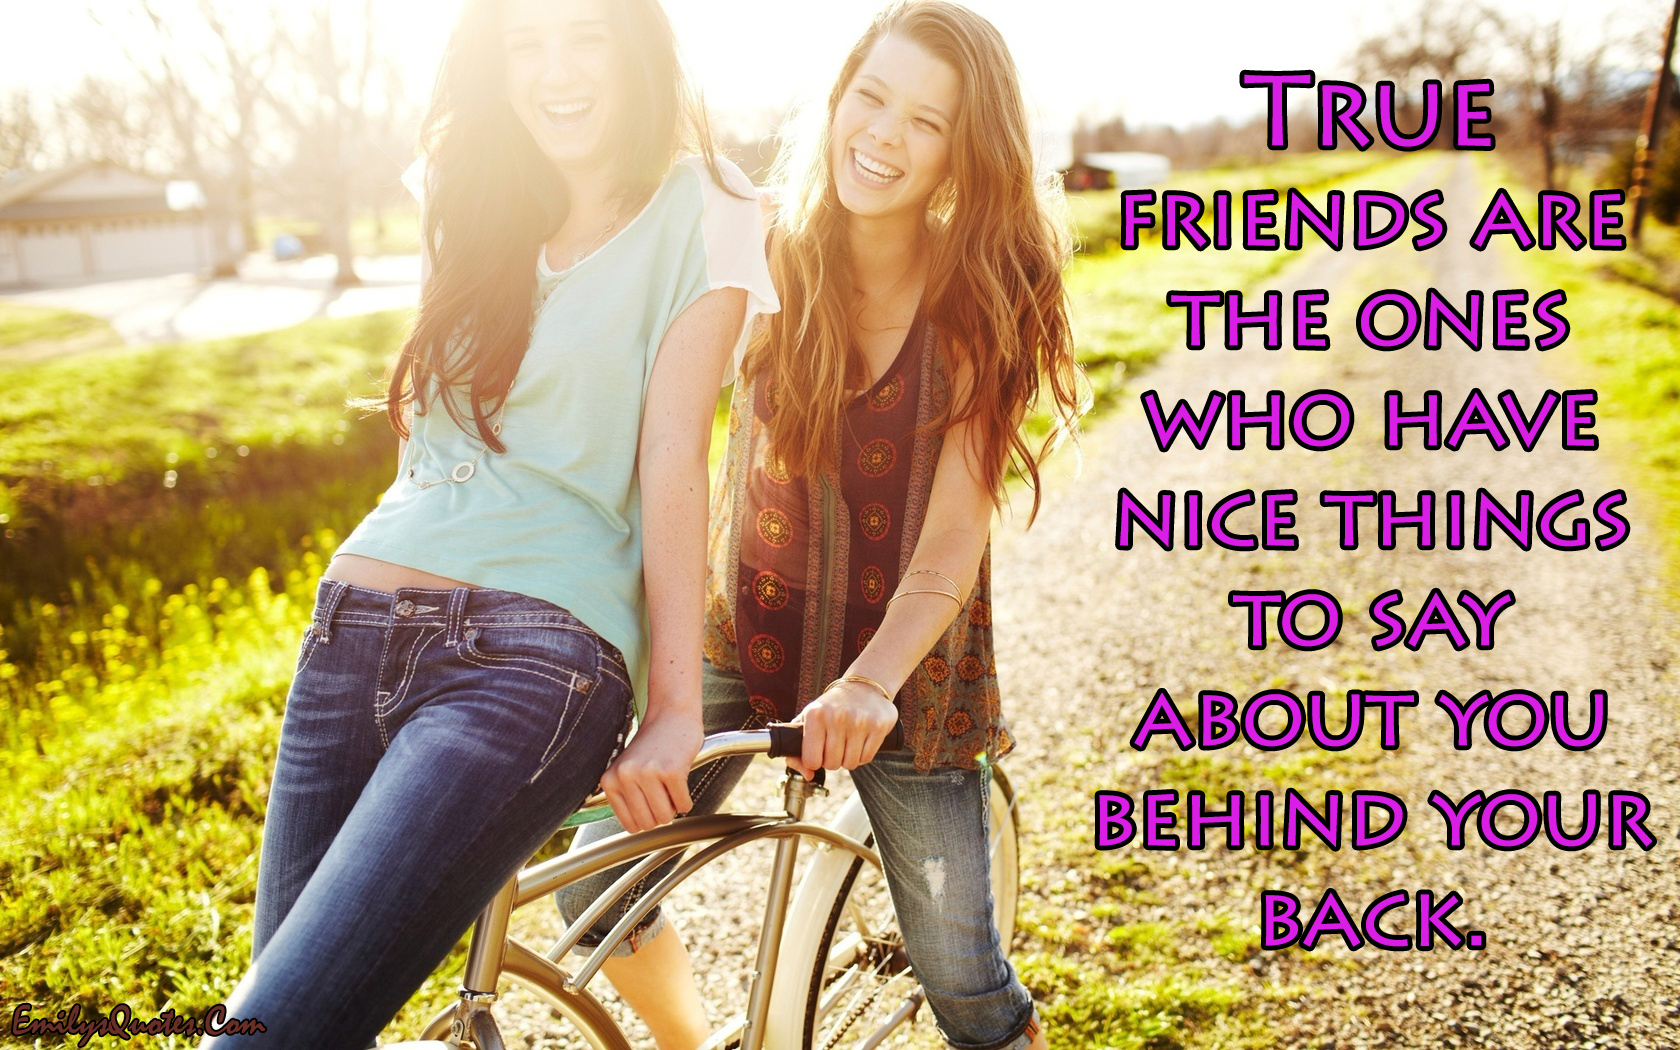 True Friends Are The Ones Who Have Nice Things To Say About You Behind